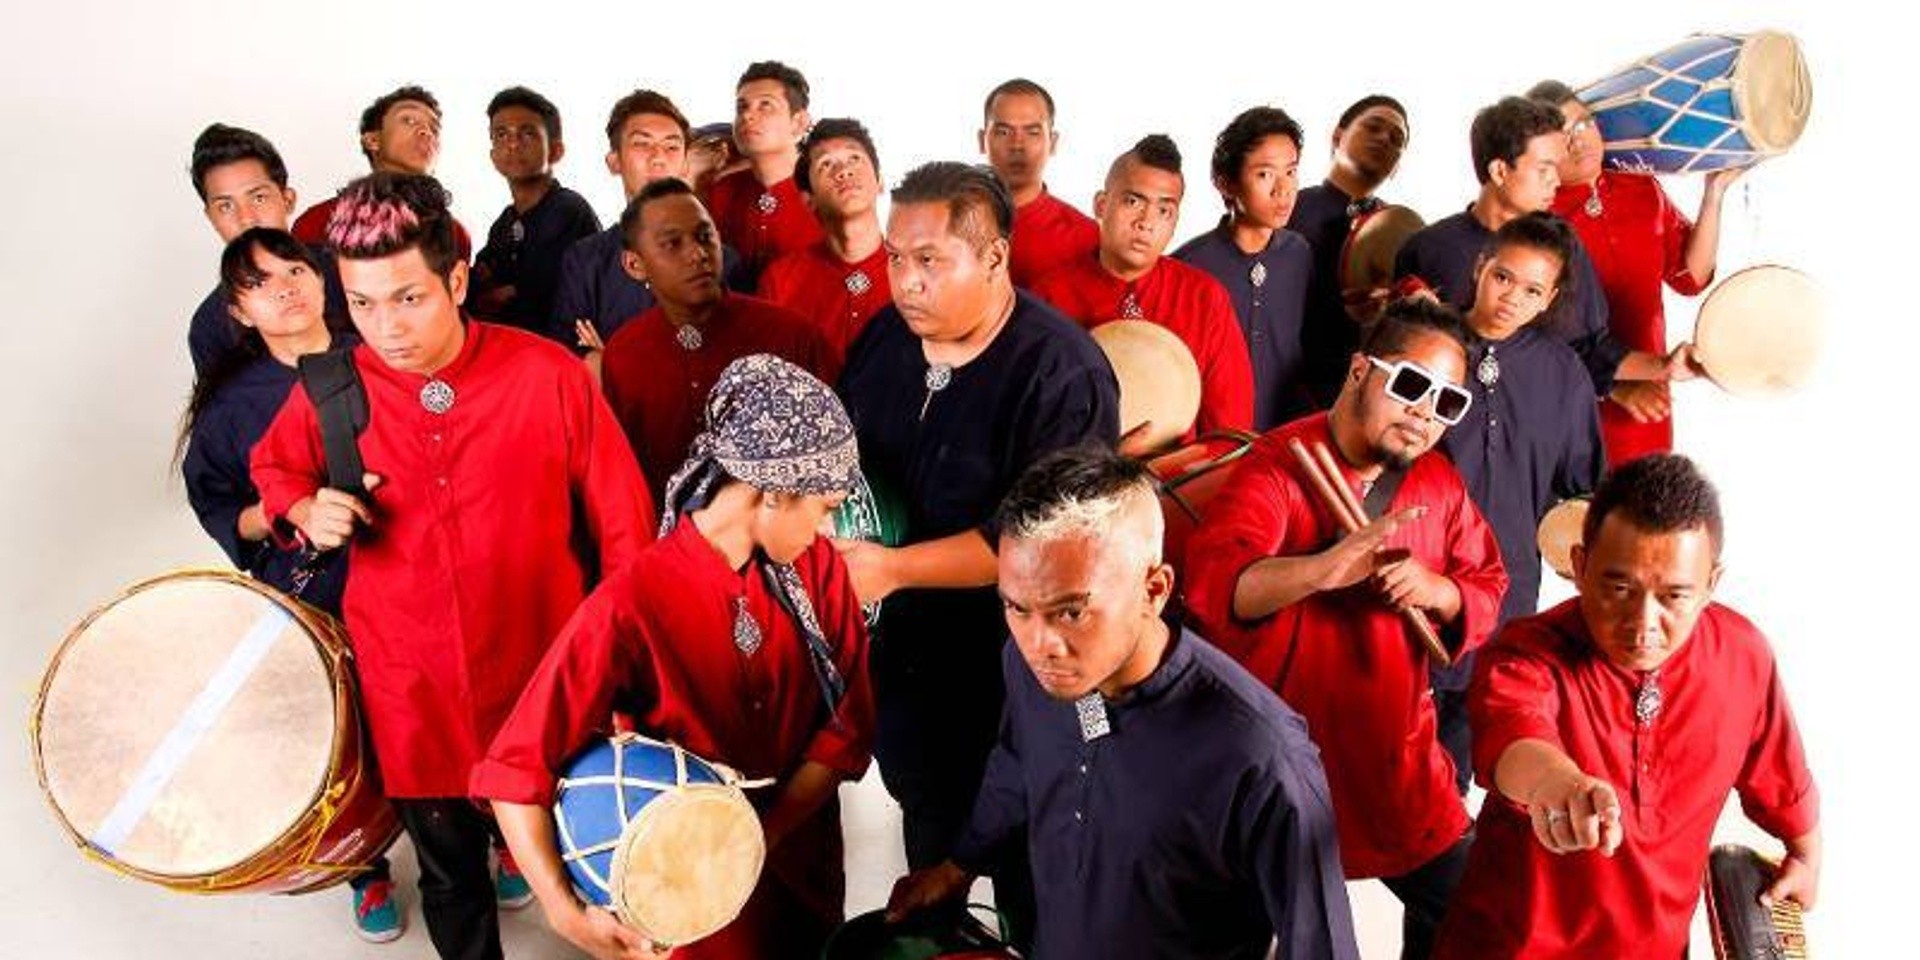 Explore what it means to create "fusion" music with SA, NADI Singapura and more